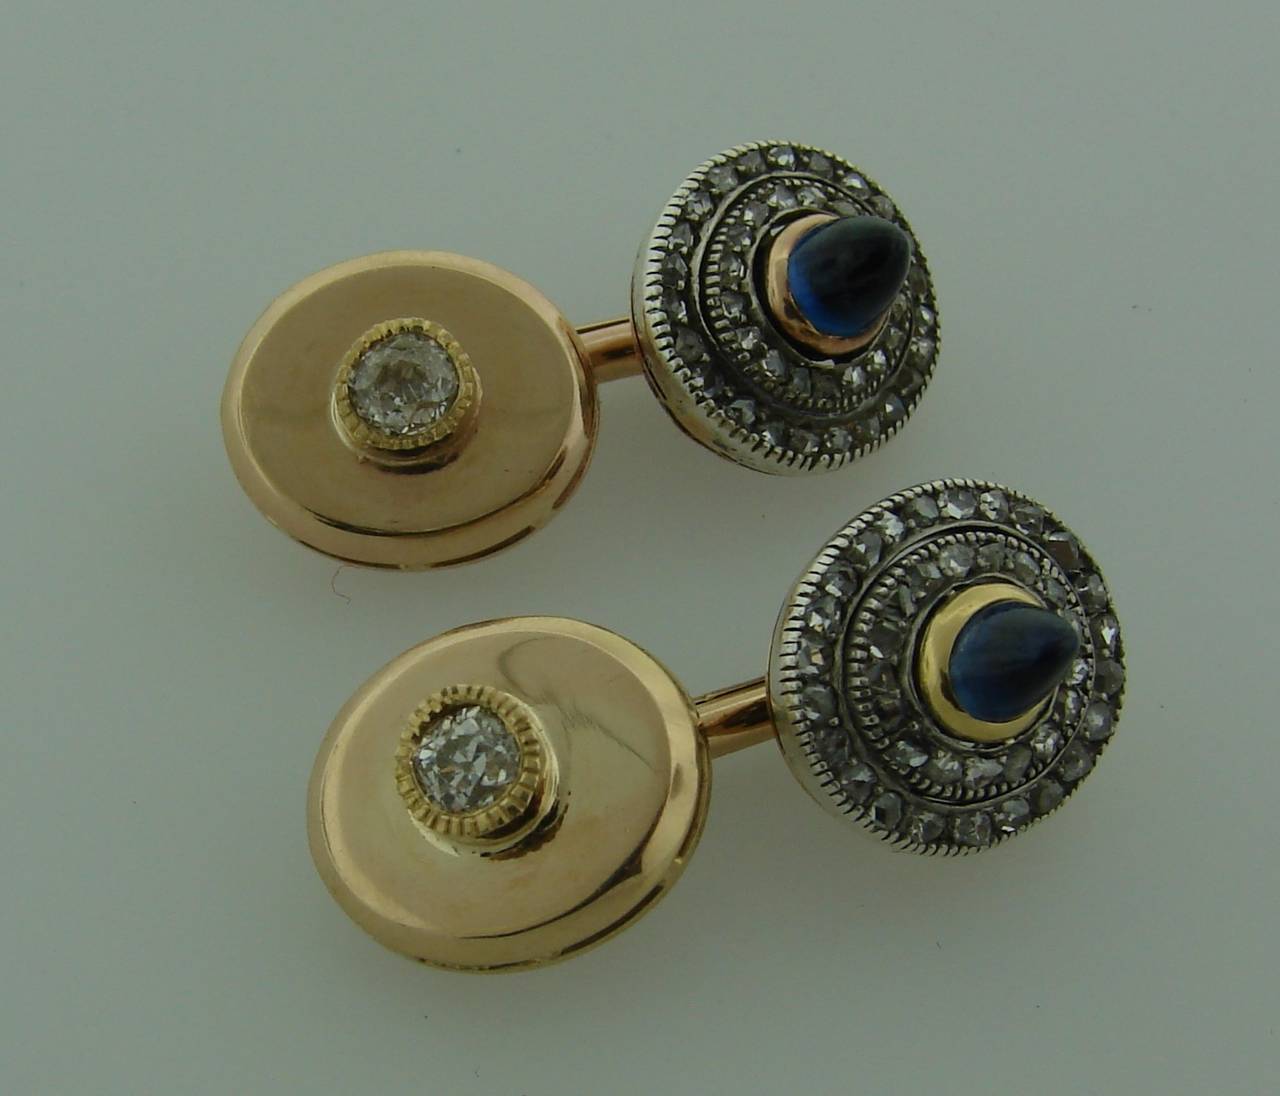 Elegant and classy pair of cufflinks created in the 1900's. Features two sugar-loaf sapphires, two cushion cut diamonds set in rose gold and silver. The sapphires are framed with two rows of rose cut diamonds.

The oval discs are 1/2